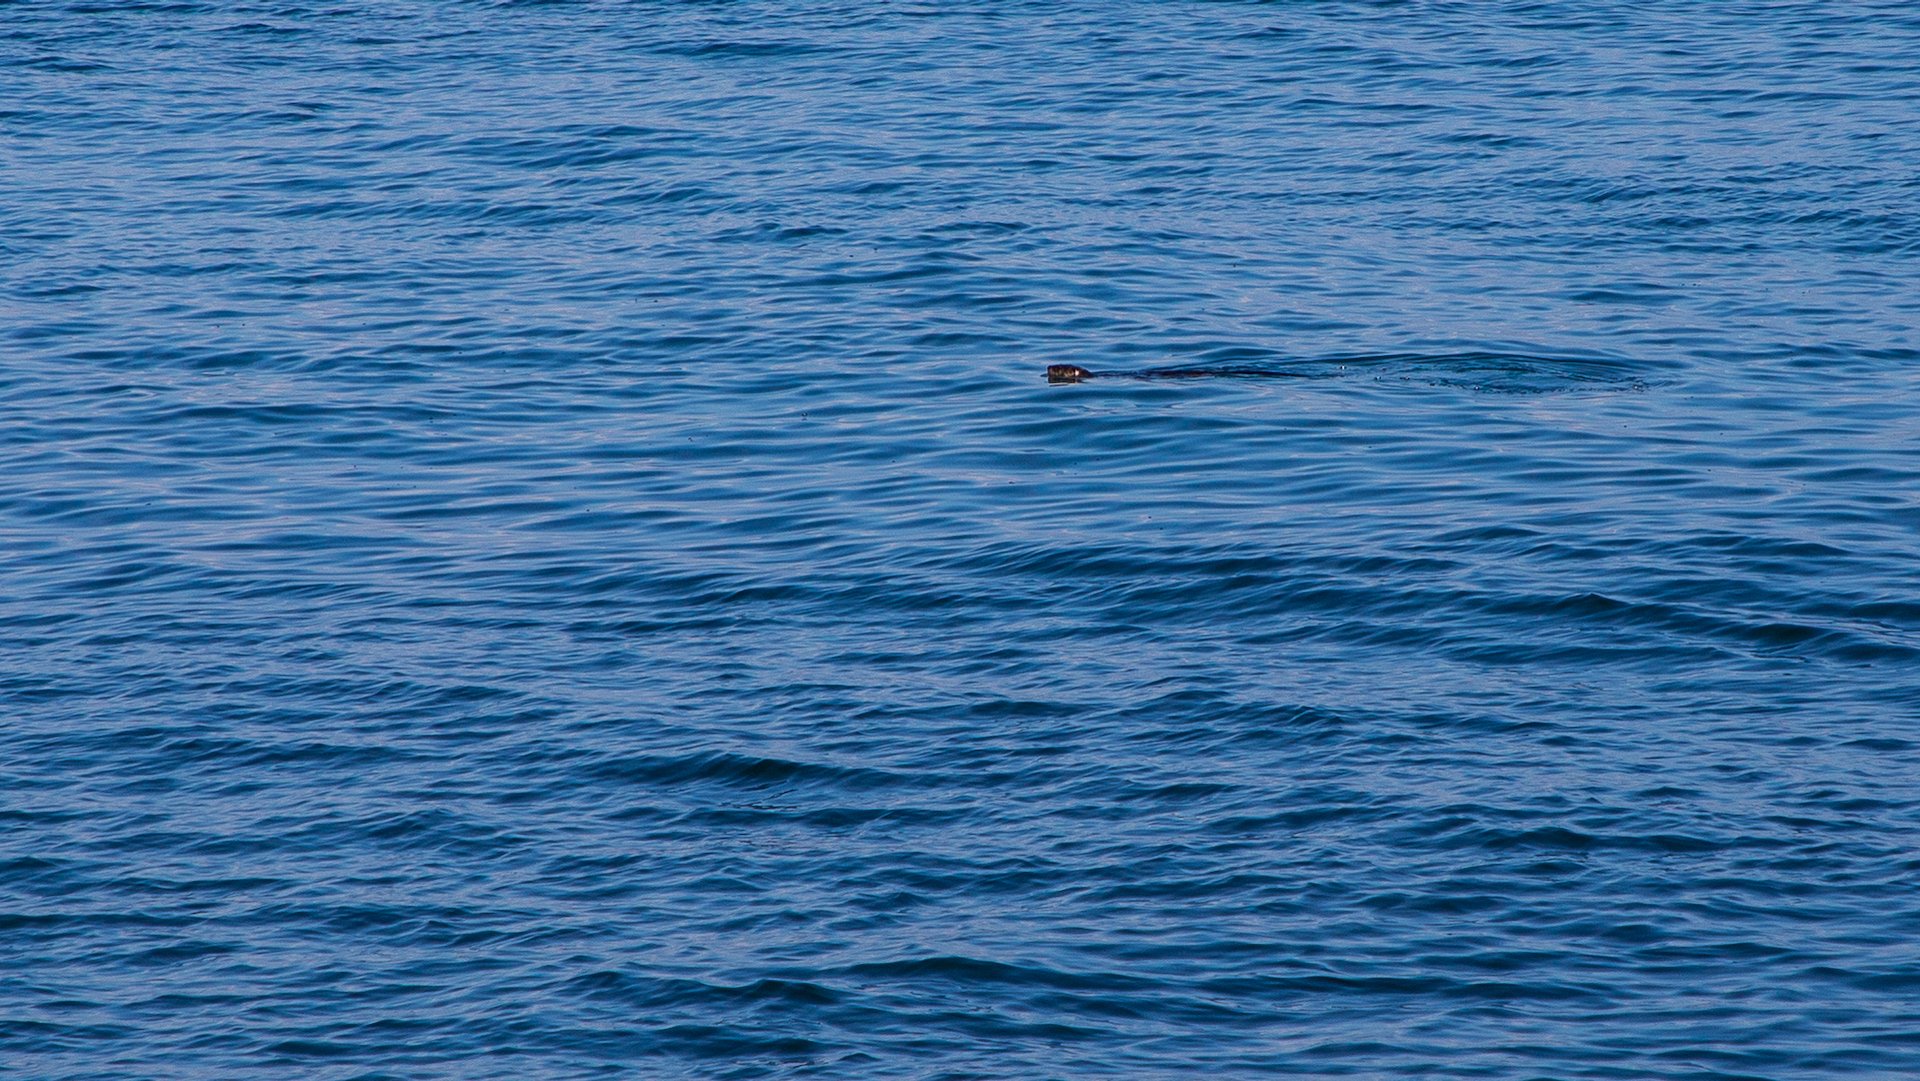  We also spotted some wildlife -  this river otter was with us for a while, plus the usual seals. 